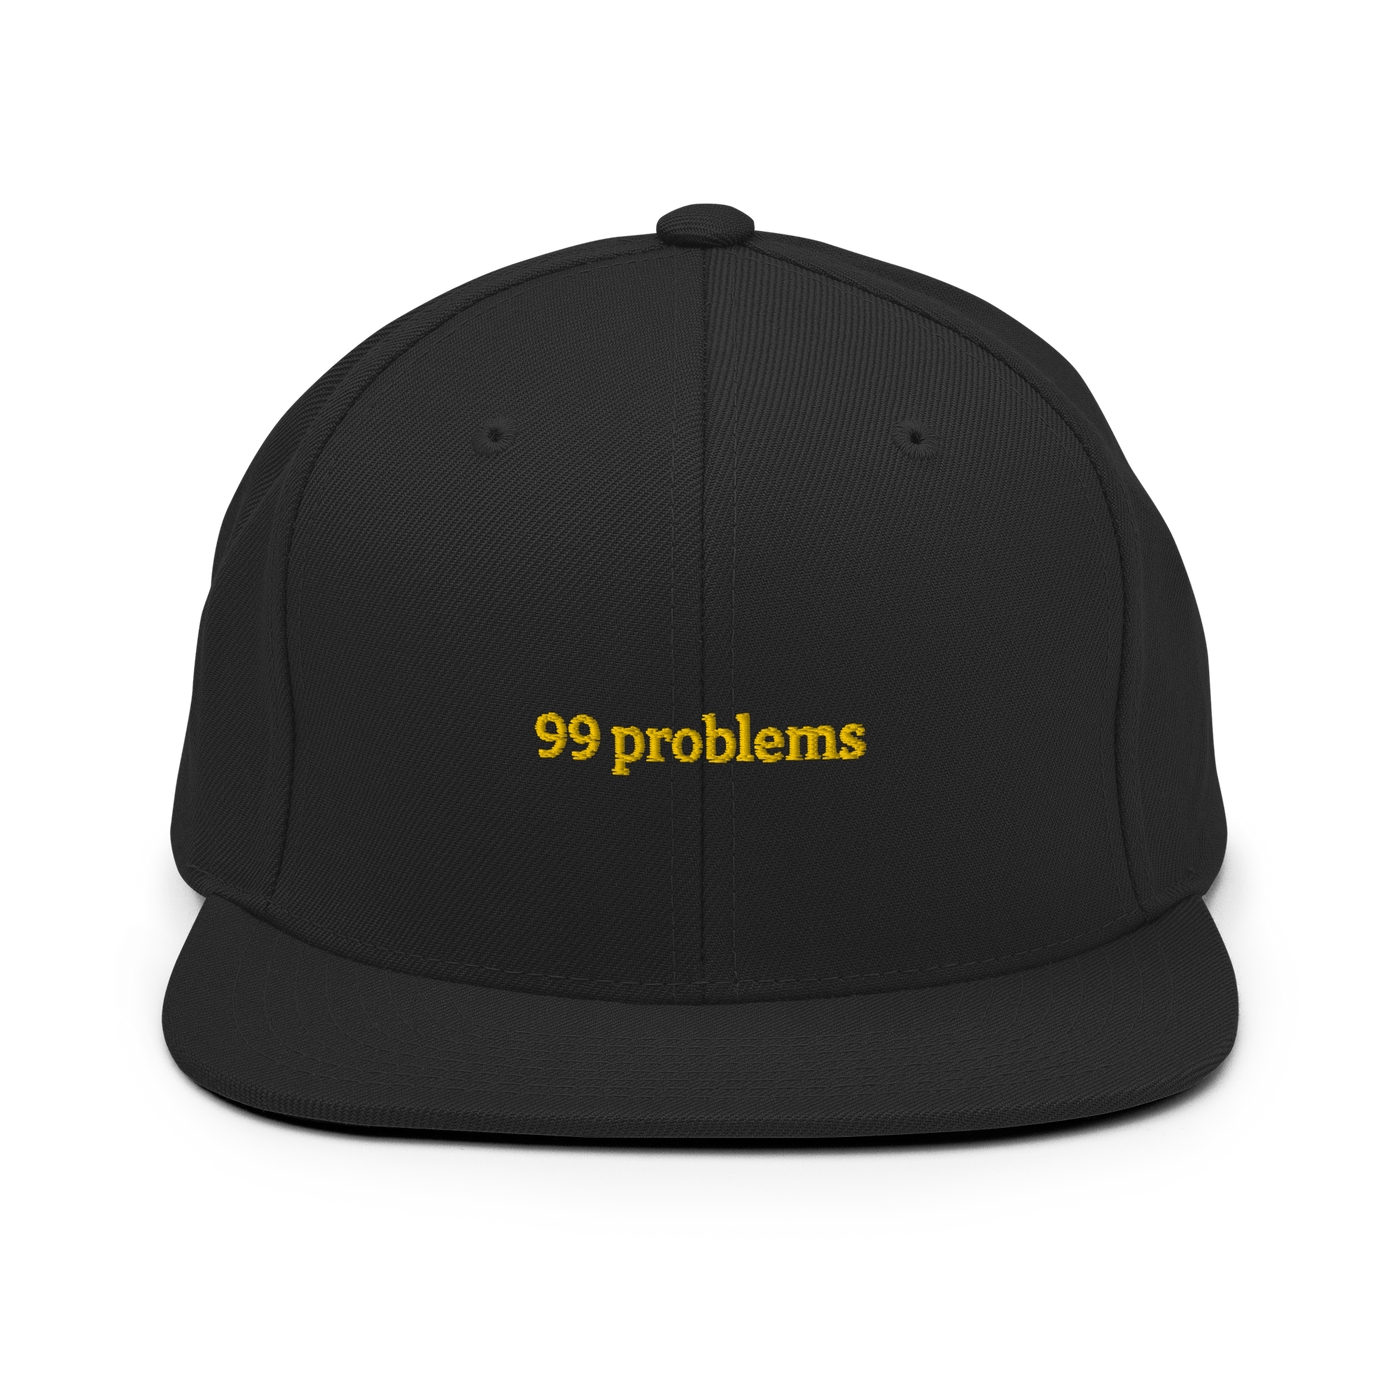 99 problems Snapback - Black - - Just Another Cap Store